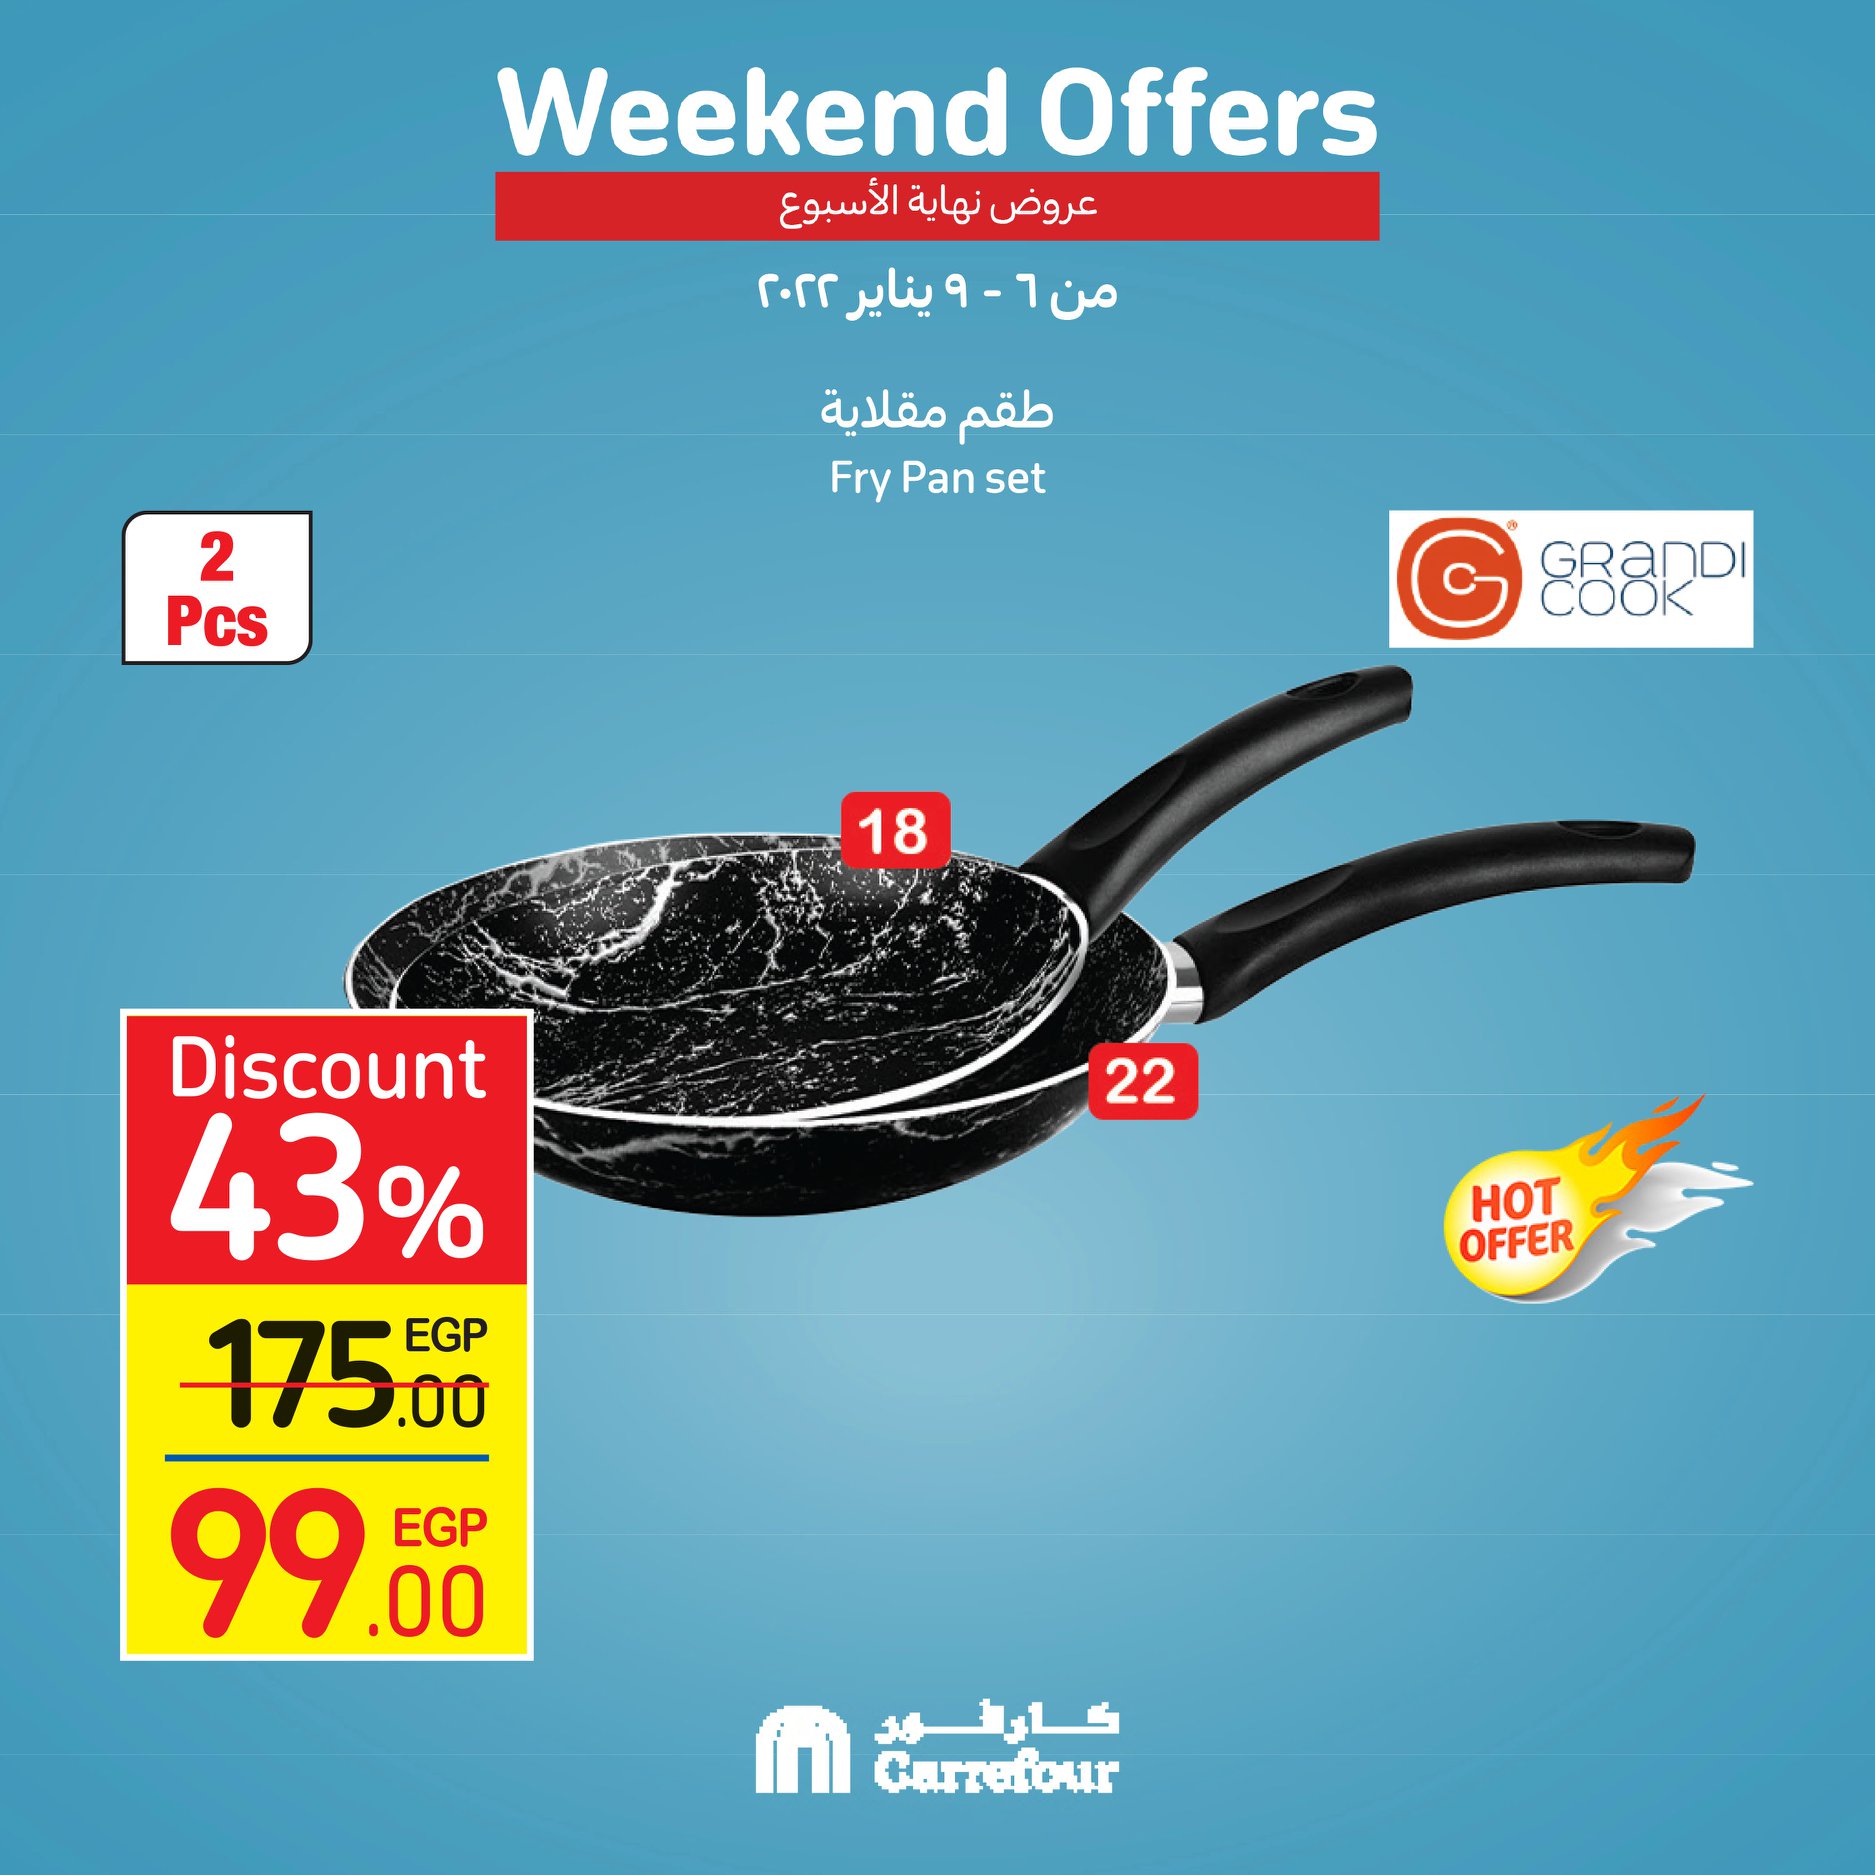 Now, the strongest offers and surprises from Carrefour, half-price discounts, at Weekend until January 16th, 29